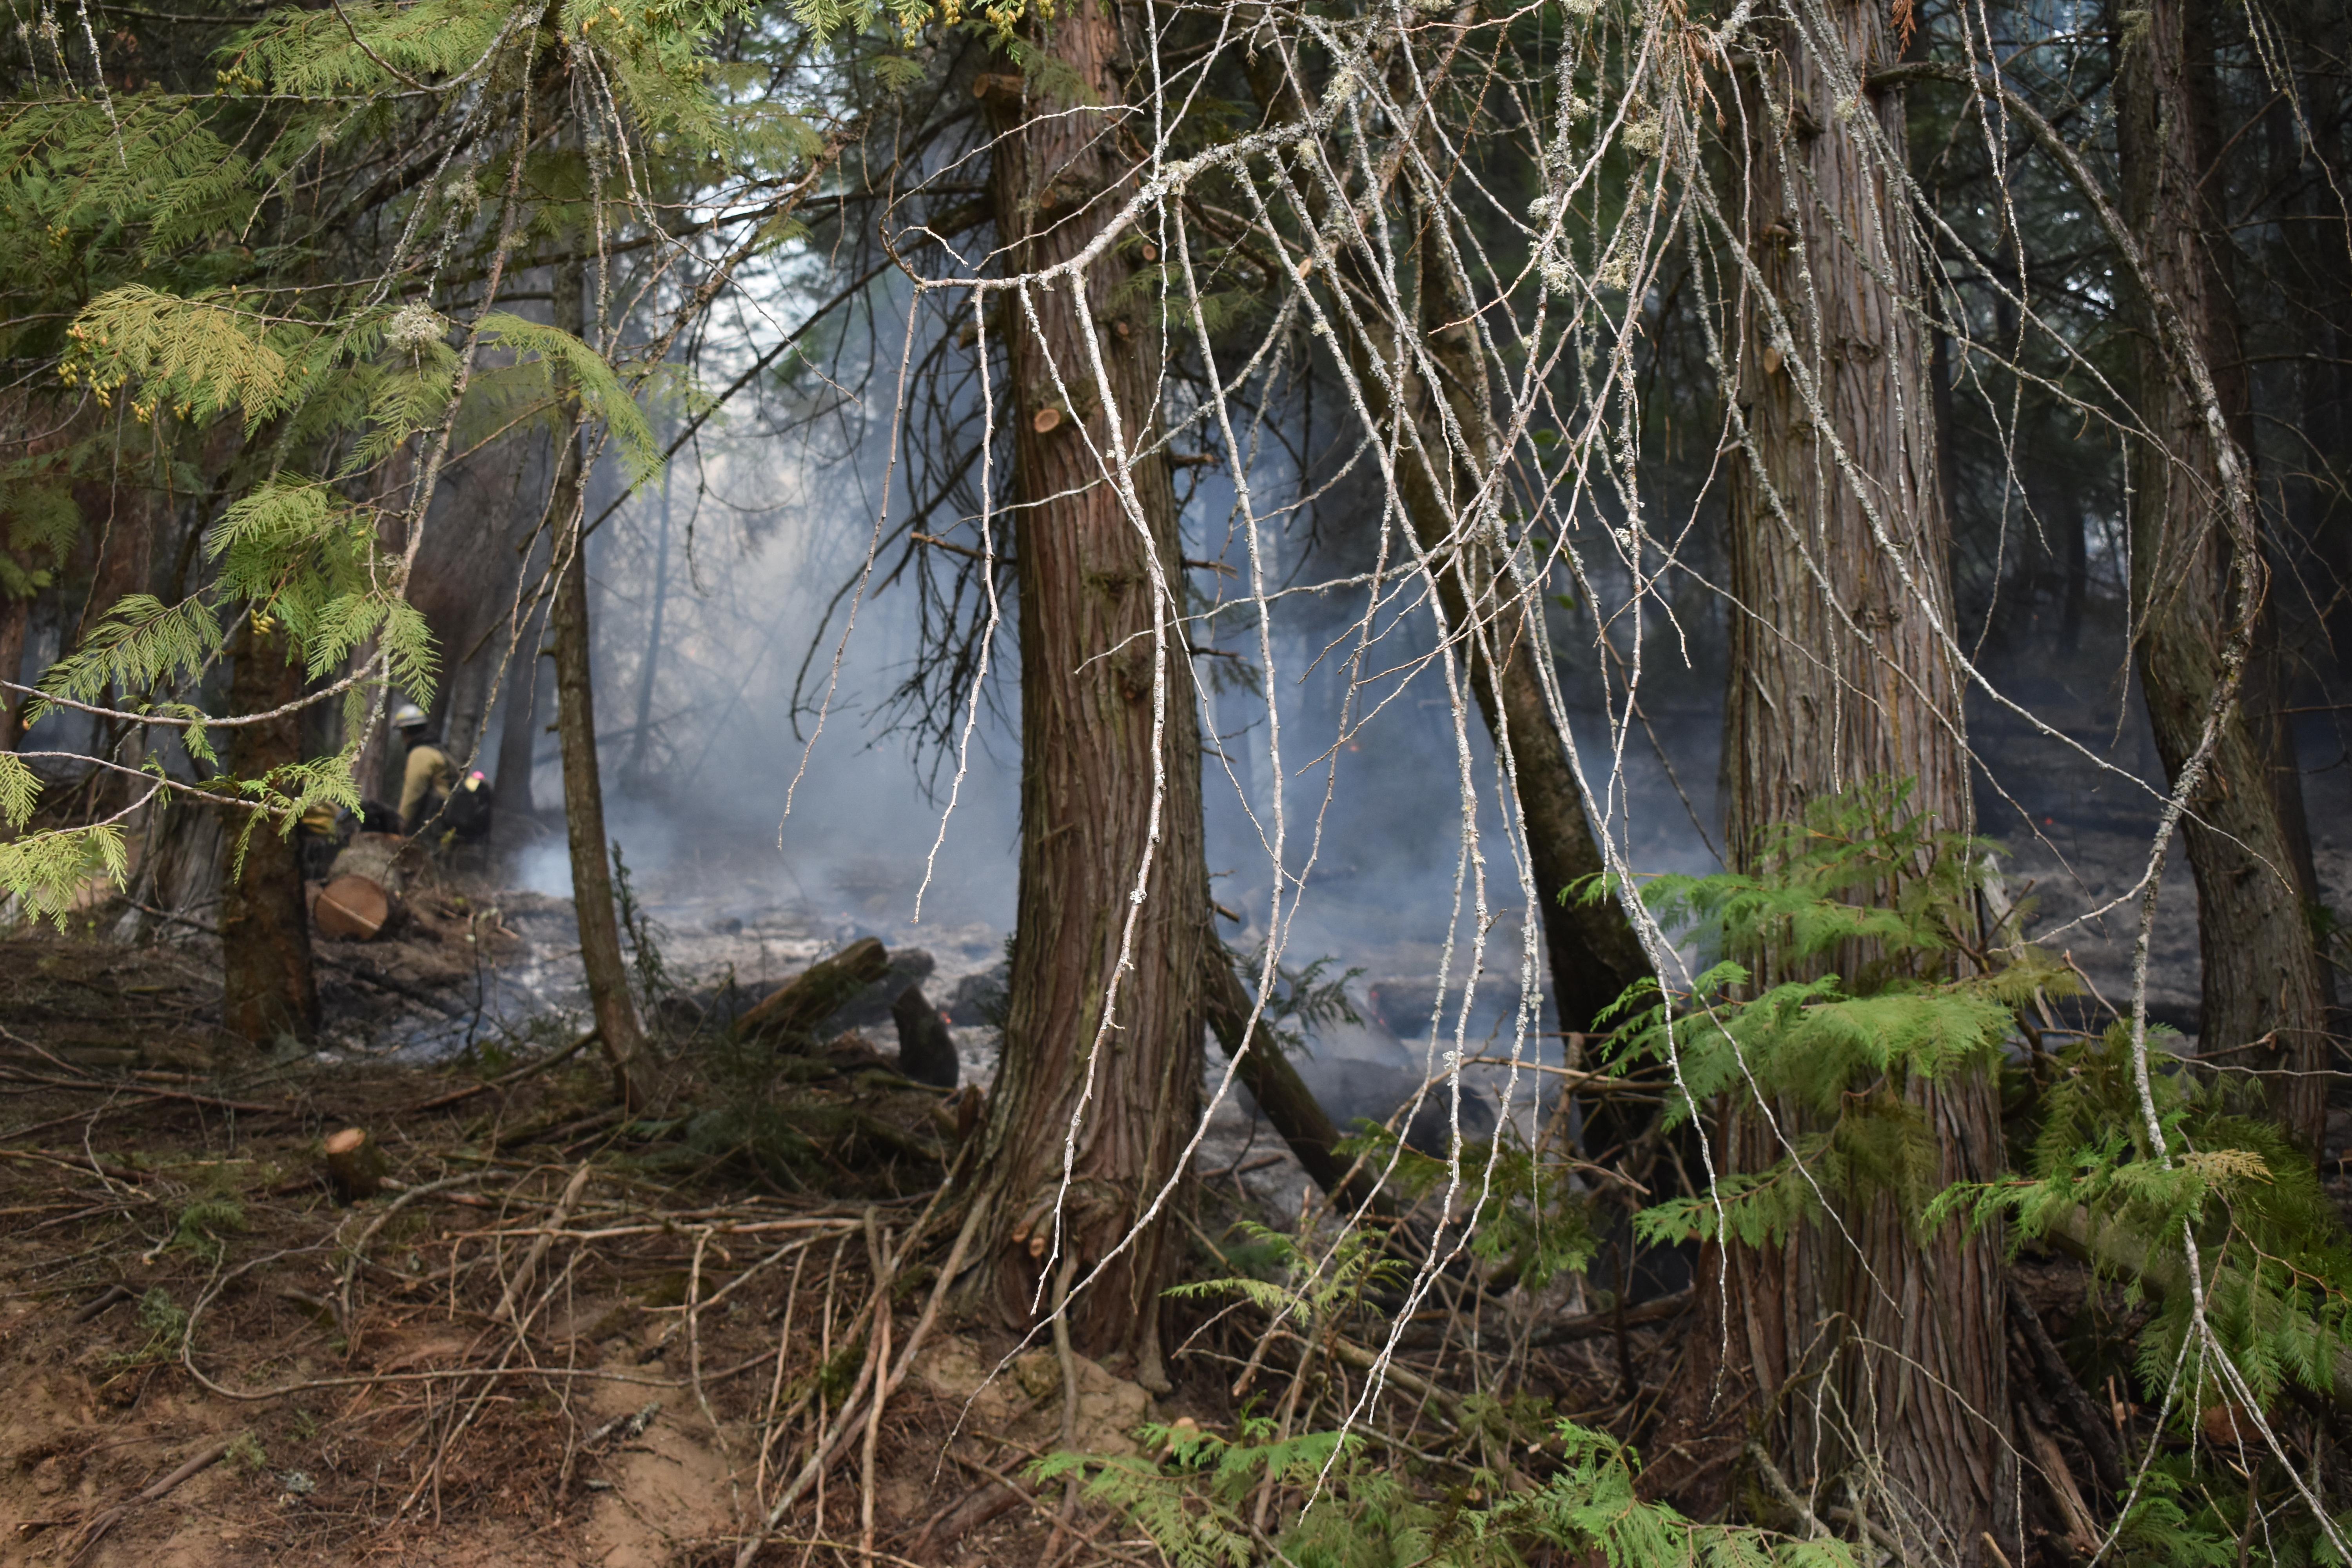 Firefighter working on the fireline. Fire is smoldering in the background behind the trees.